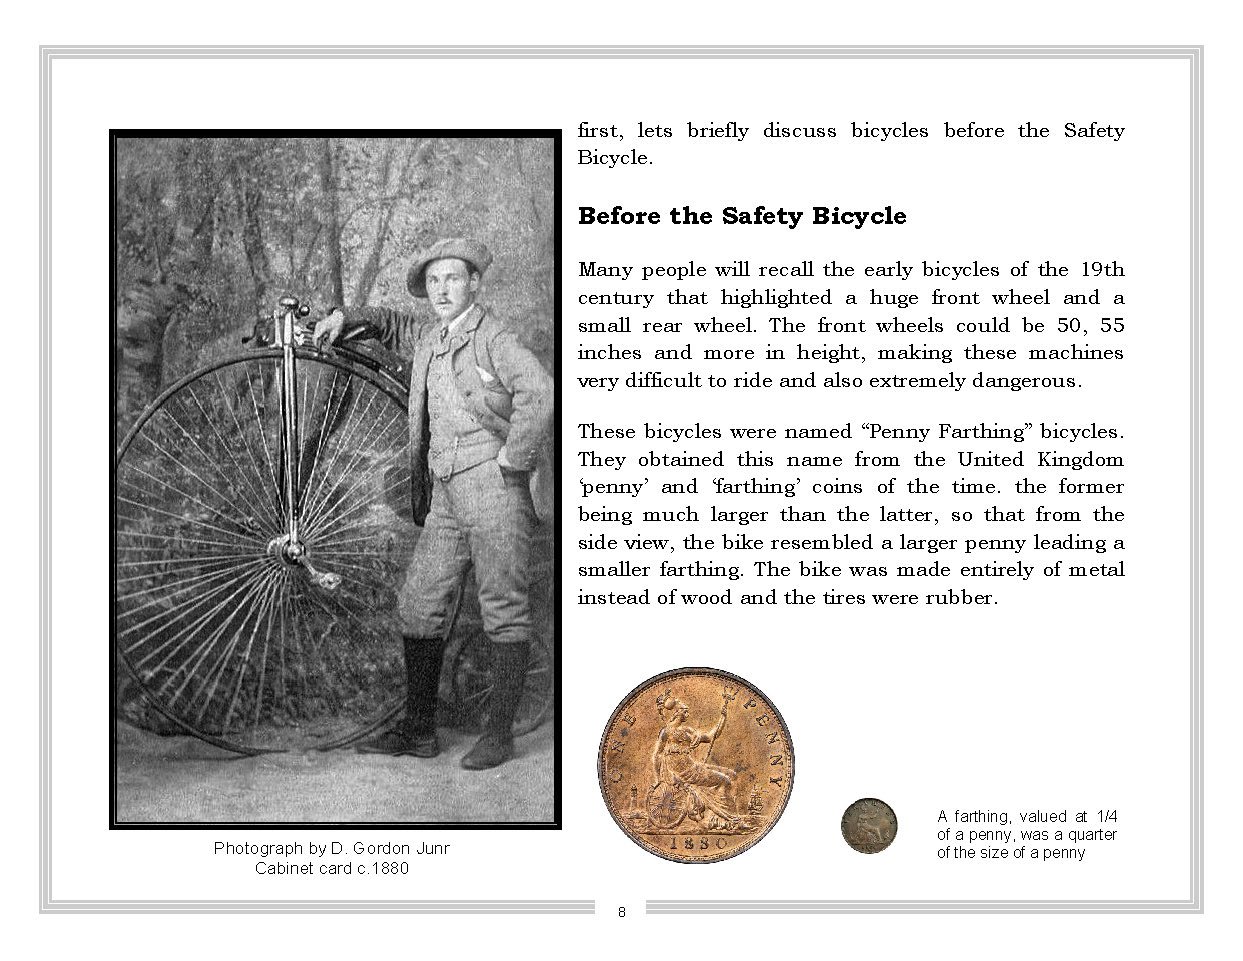 Book - The History of the Bicycle_Page_08.jpg